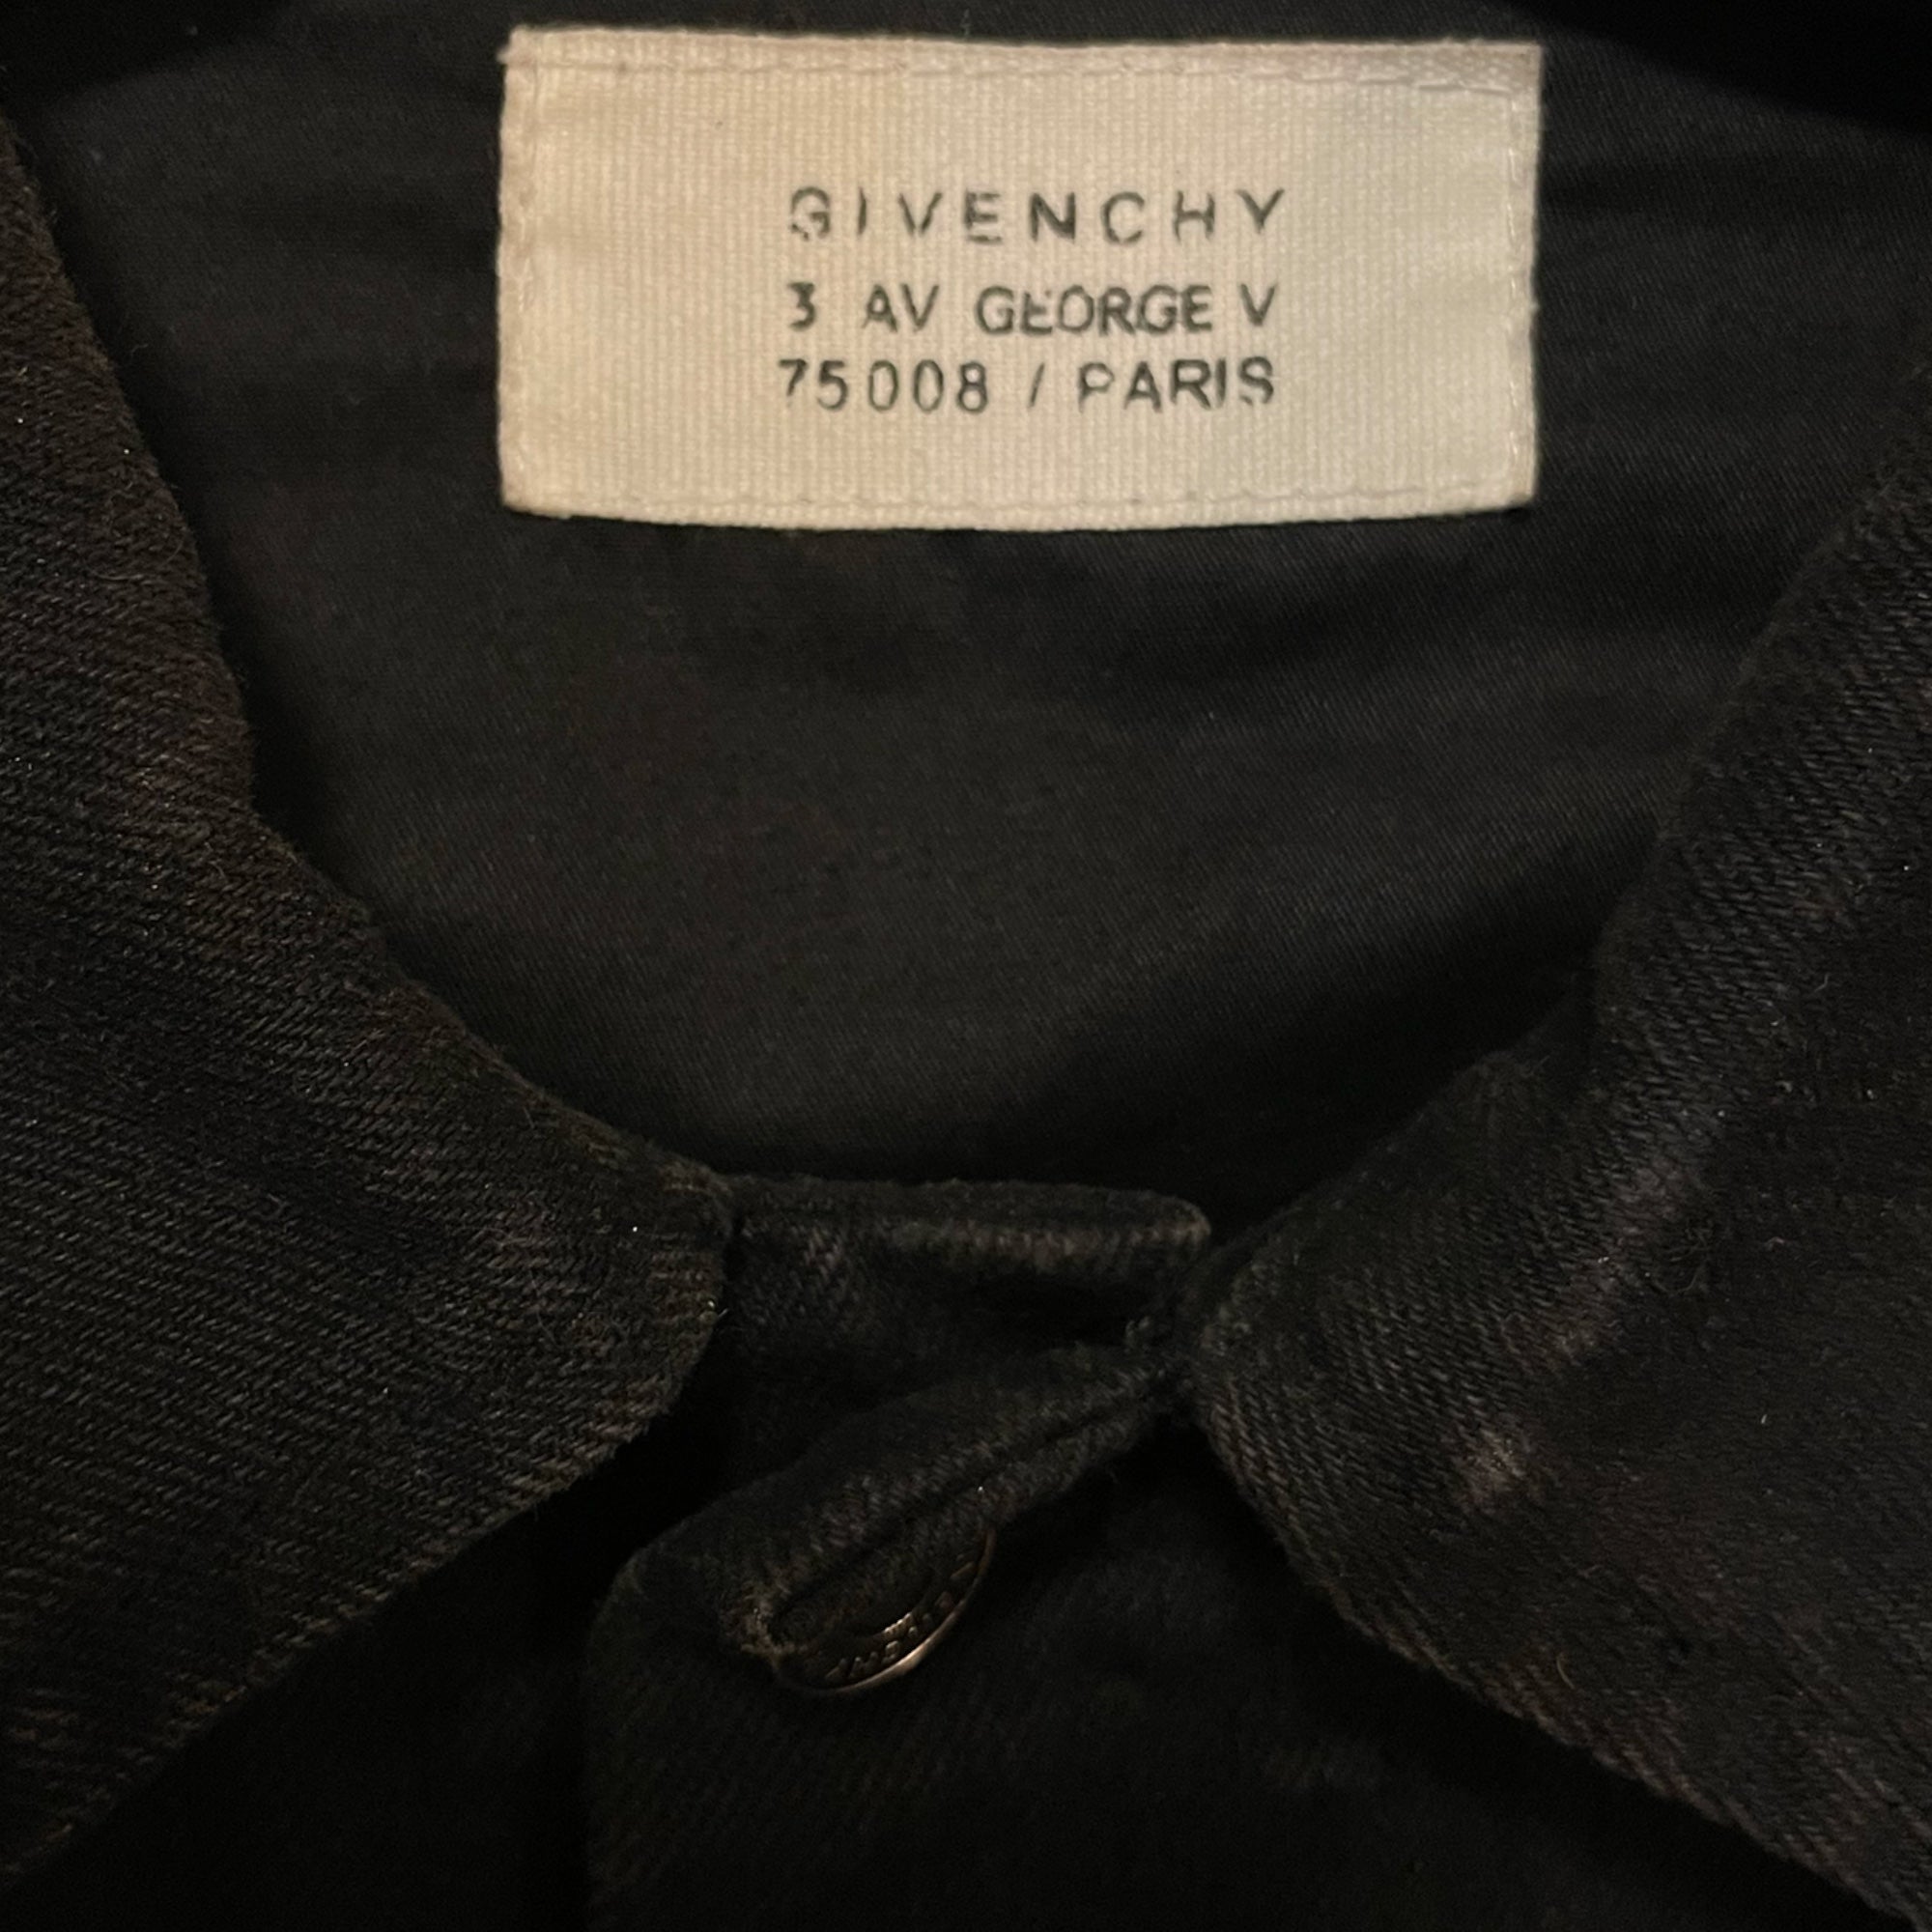 GIVENCHY Men's Denim Embroidered Logo Jacket |Size: XL| Made in Italy